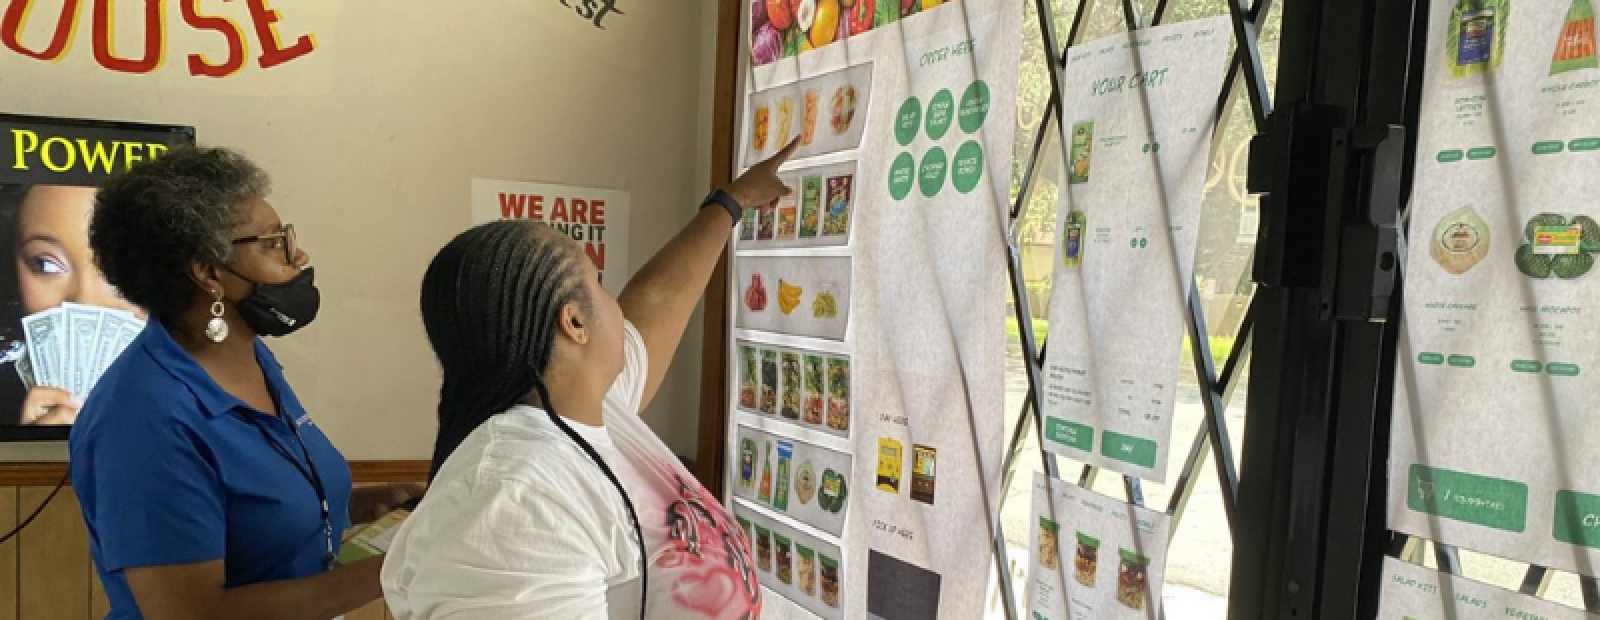 Residents interact with the healthy vending machine prototype